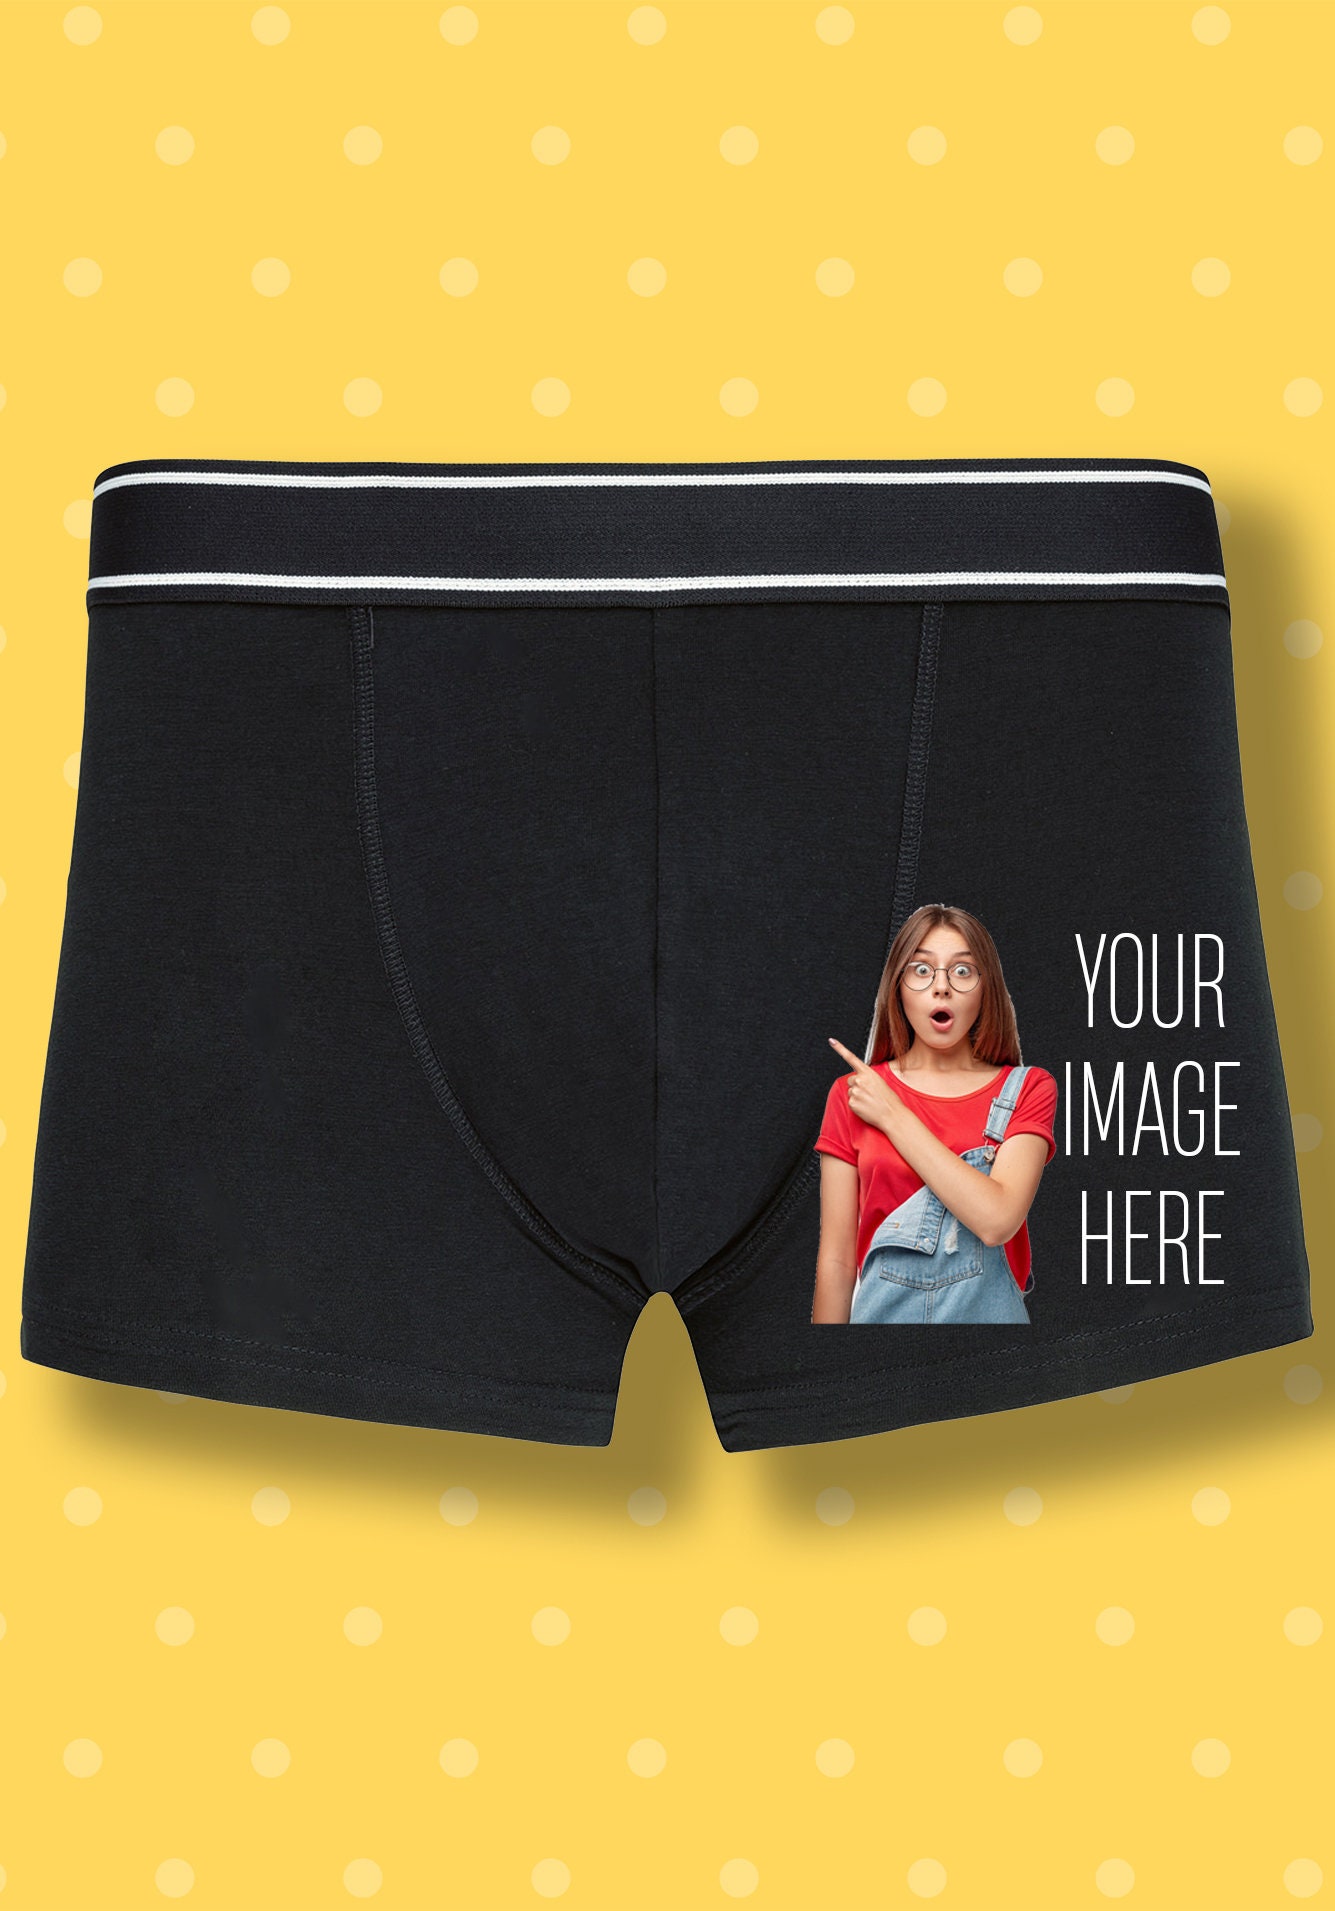 Custom Boxers Briefs,personalized I'm Nuts About You Underwear